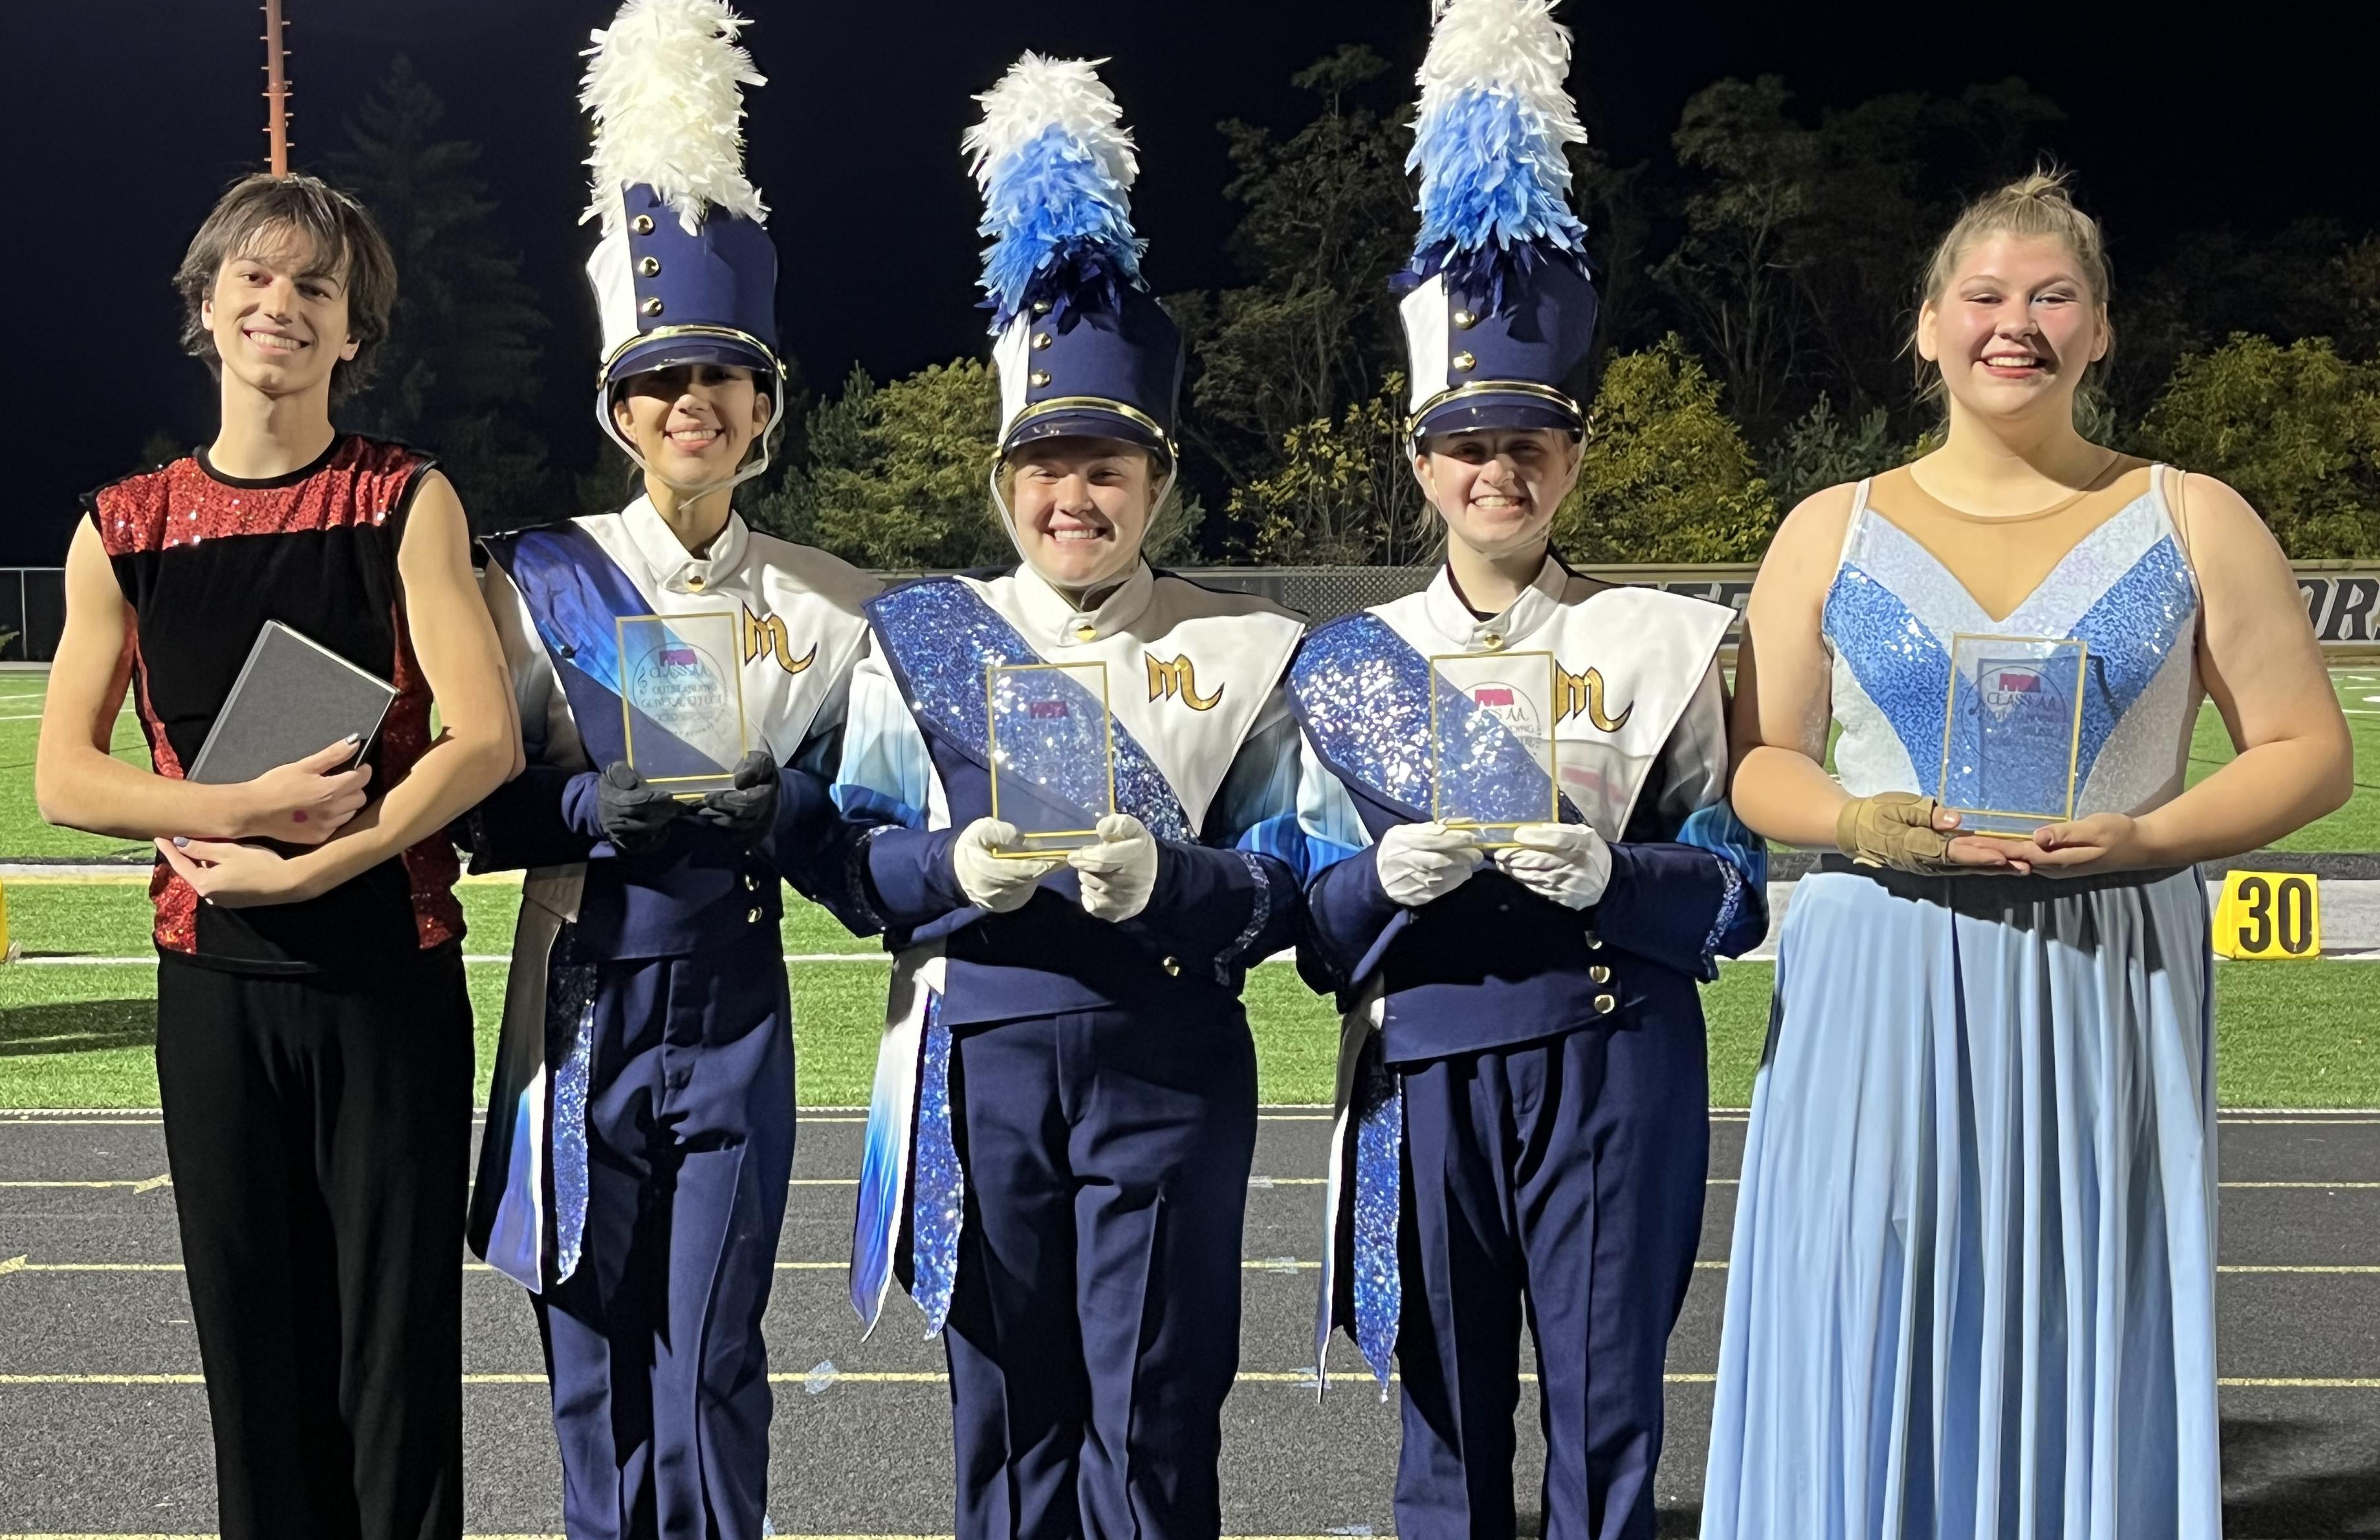 Members of Mars Area High School Marching Band pause for a picture with their first-place trophy earned at the Gateway Marching Band Festival on Oct. 15.